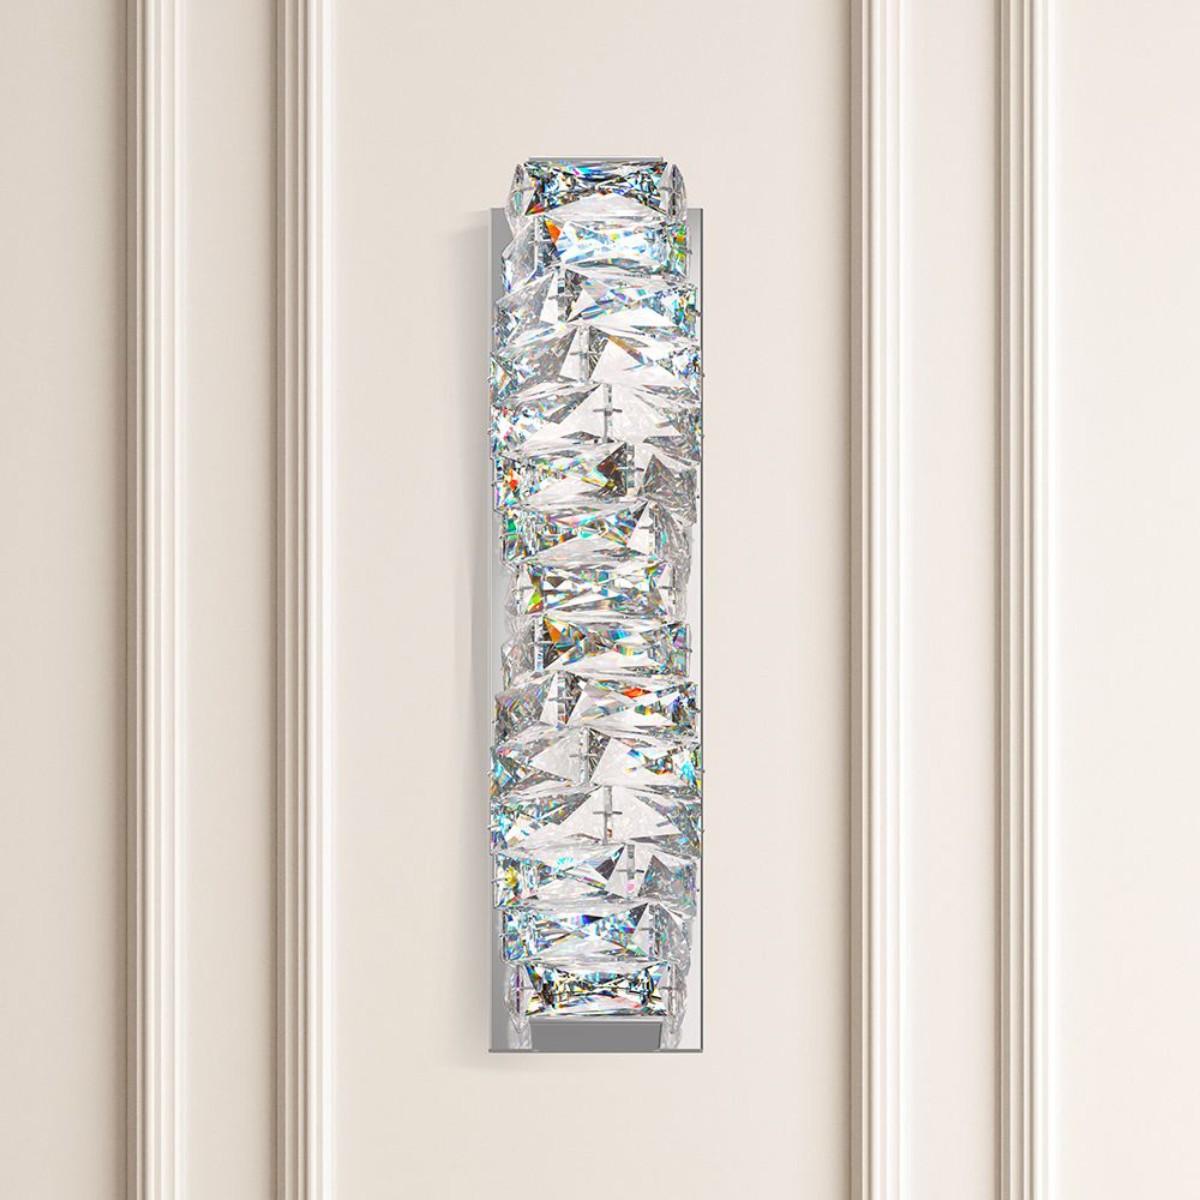 Glissando LED 18 inch. Stainless Steel Flush Mount Sconce with Crystals from Swarovski